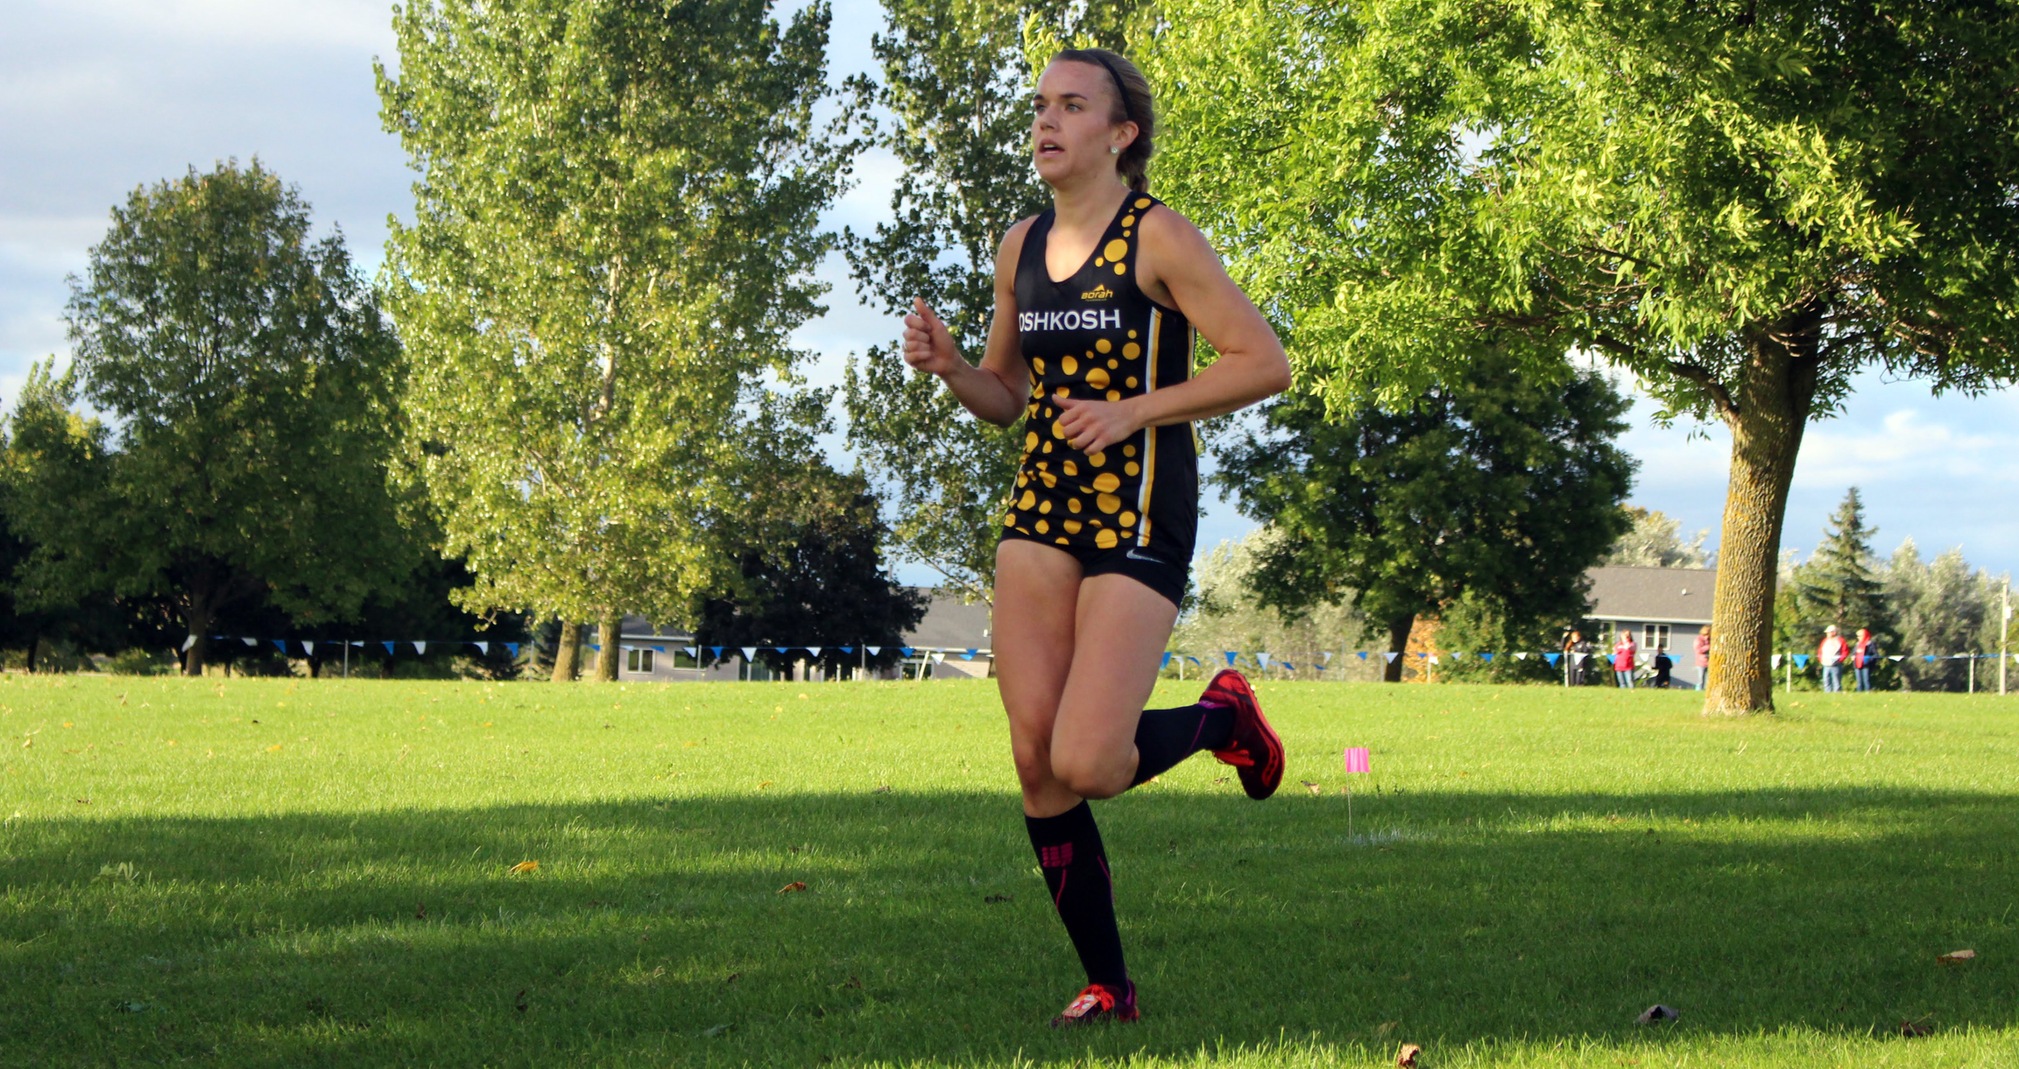 Evlyn Noone was an eighth-place finisher during her Midwest Regional debut.